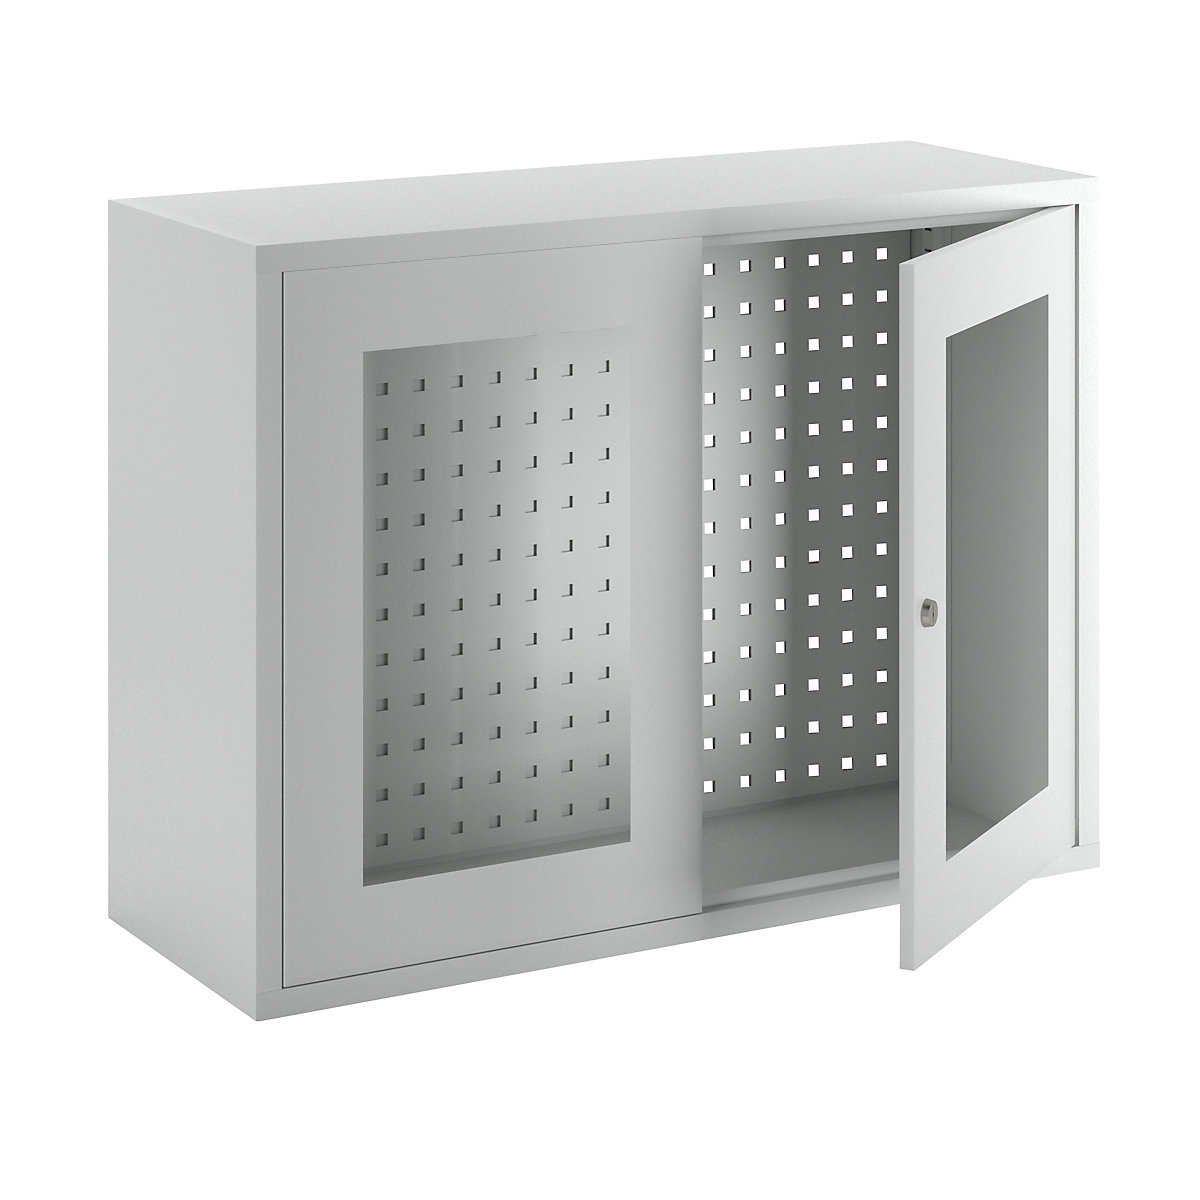 Wall mounted cupboard, height 600 mm – Pavoy, with vision panel door/s, width 800 mm, perforated rear panel, grey-4